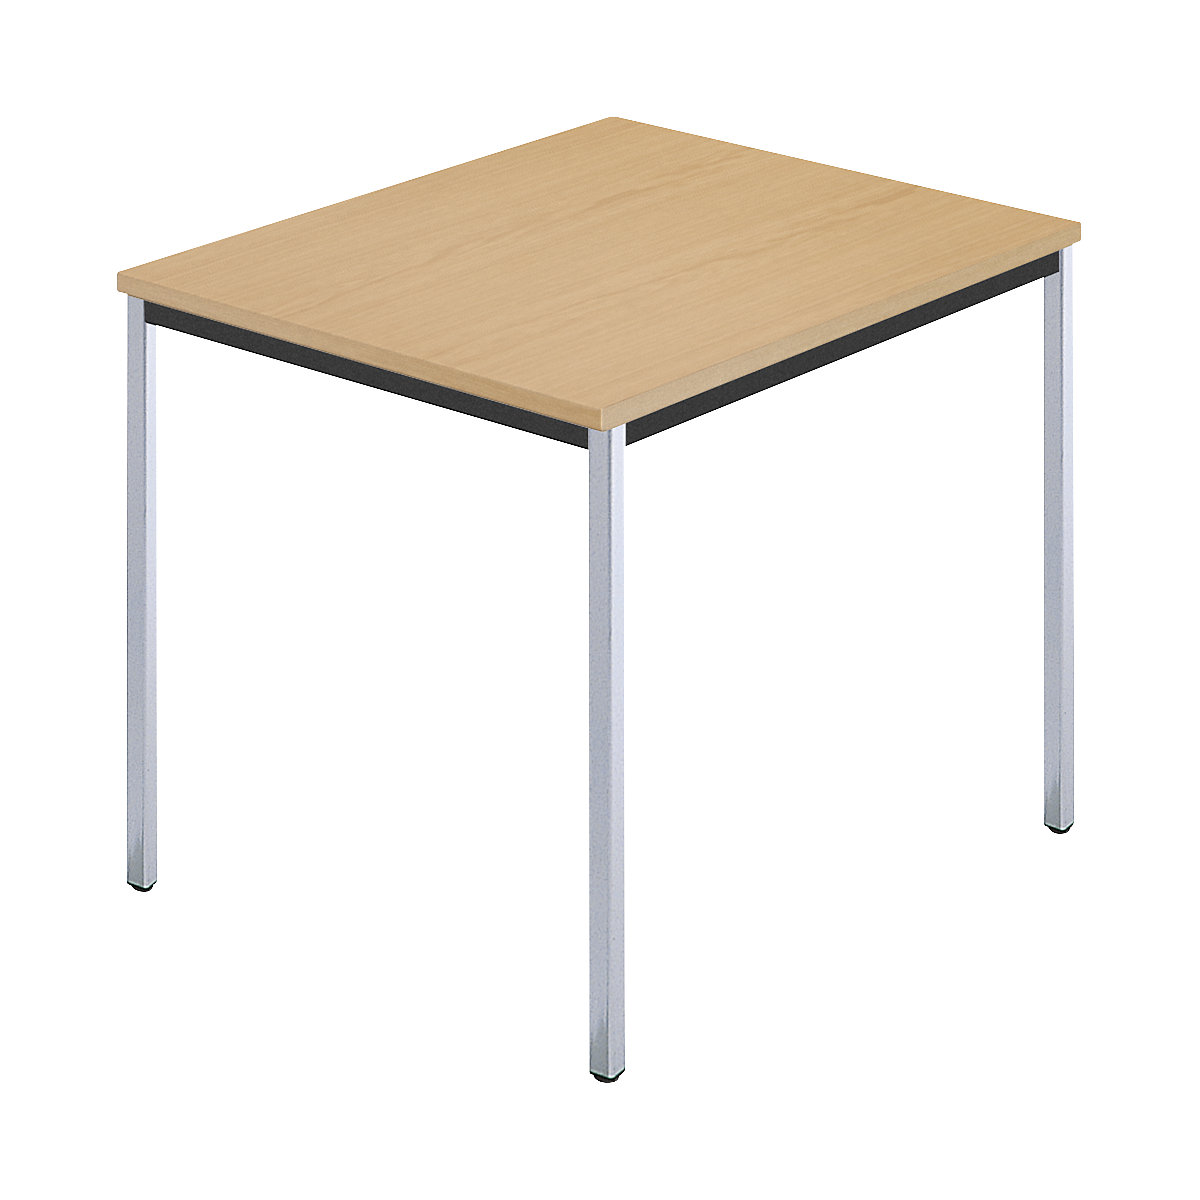 Rectangular table, square tubular steel chrome plated, WxD 800 x 800 mm, natural beech finish-5